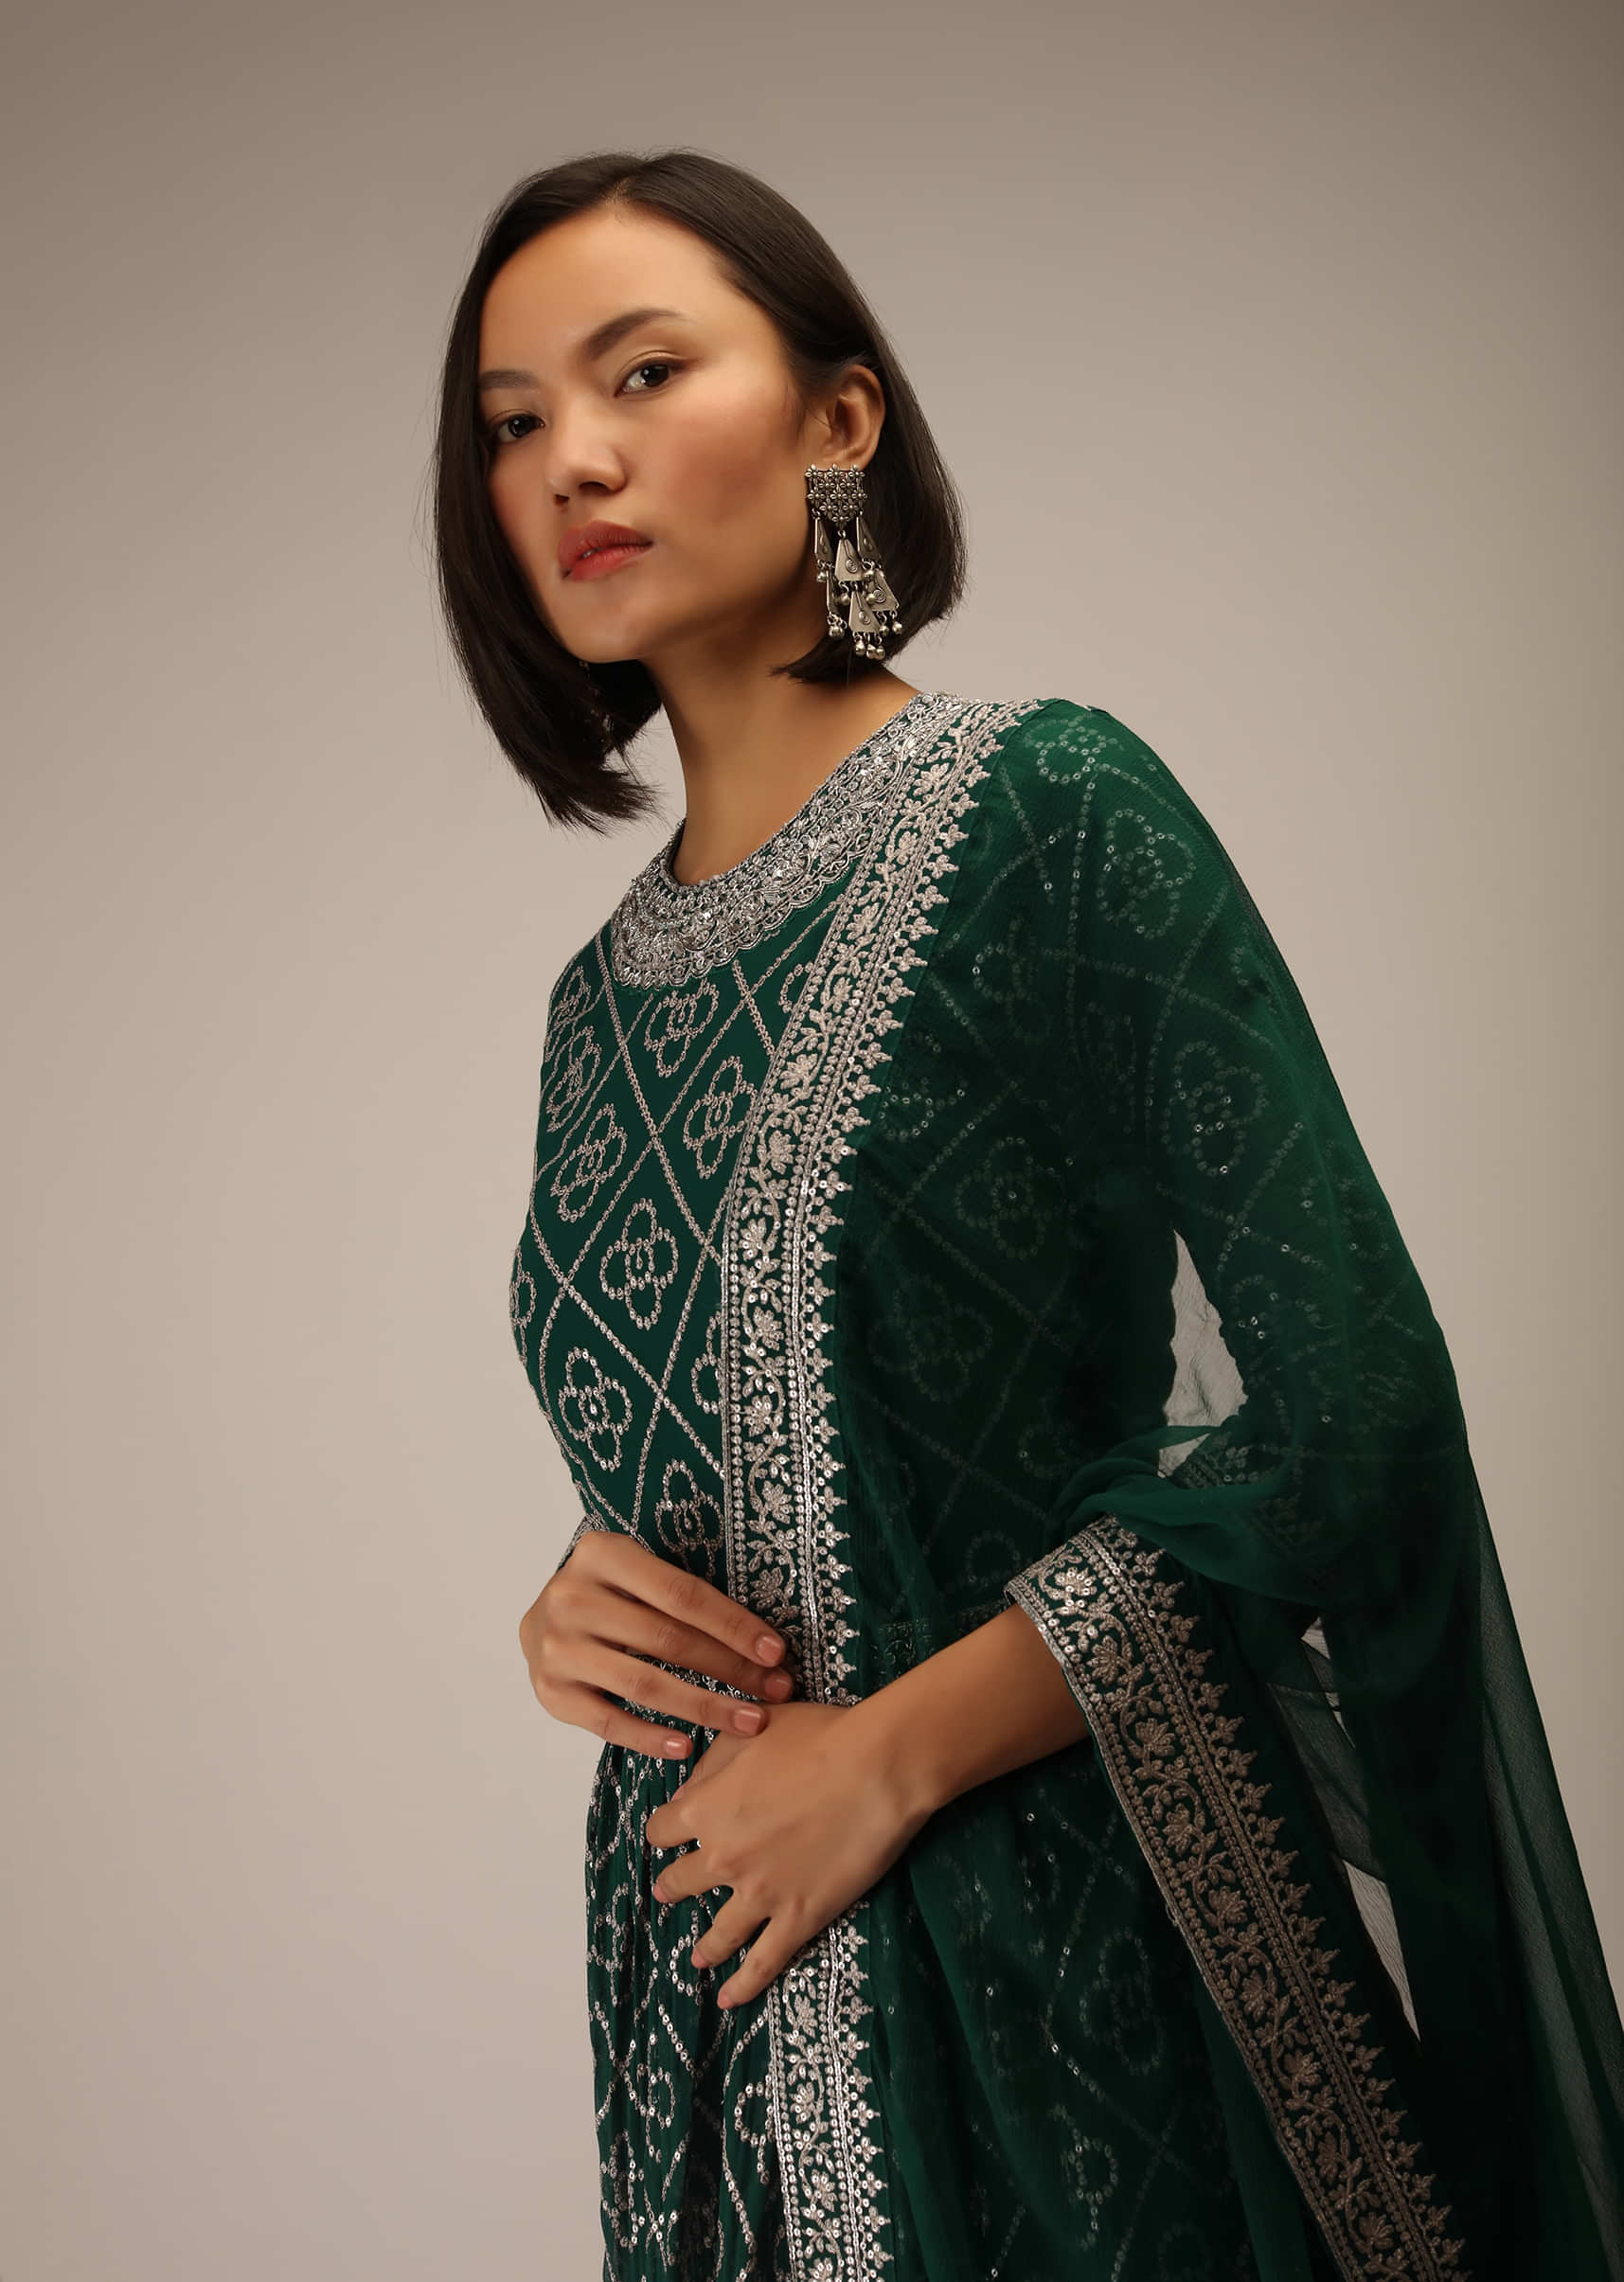 Emerald Green Anarkali Suit In Georgette With Zari And Sequins Embroidered Jaal And Three Quarter Sleeves